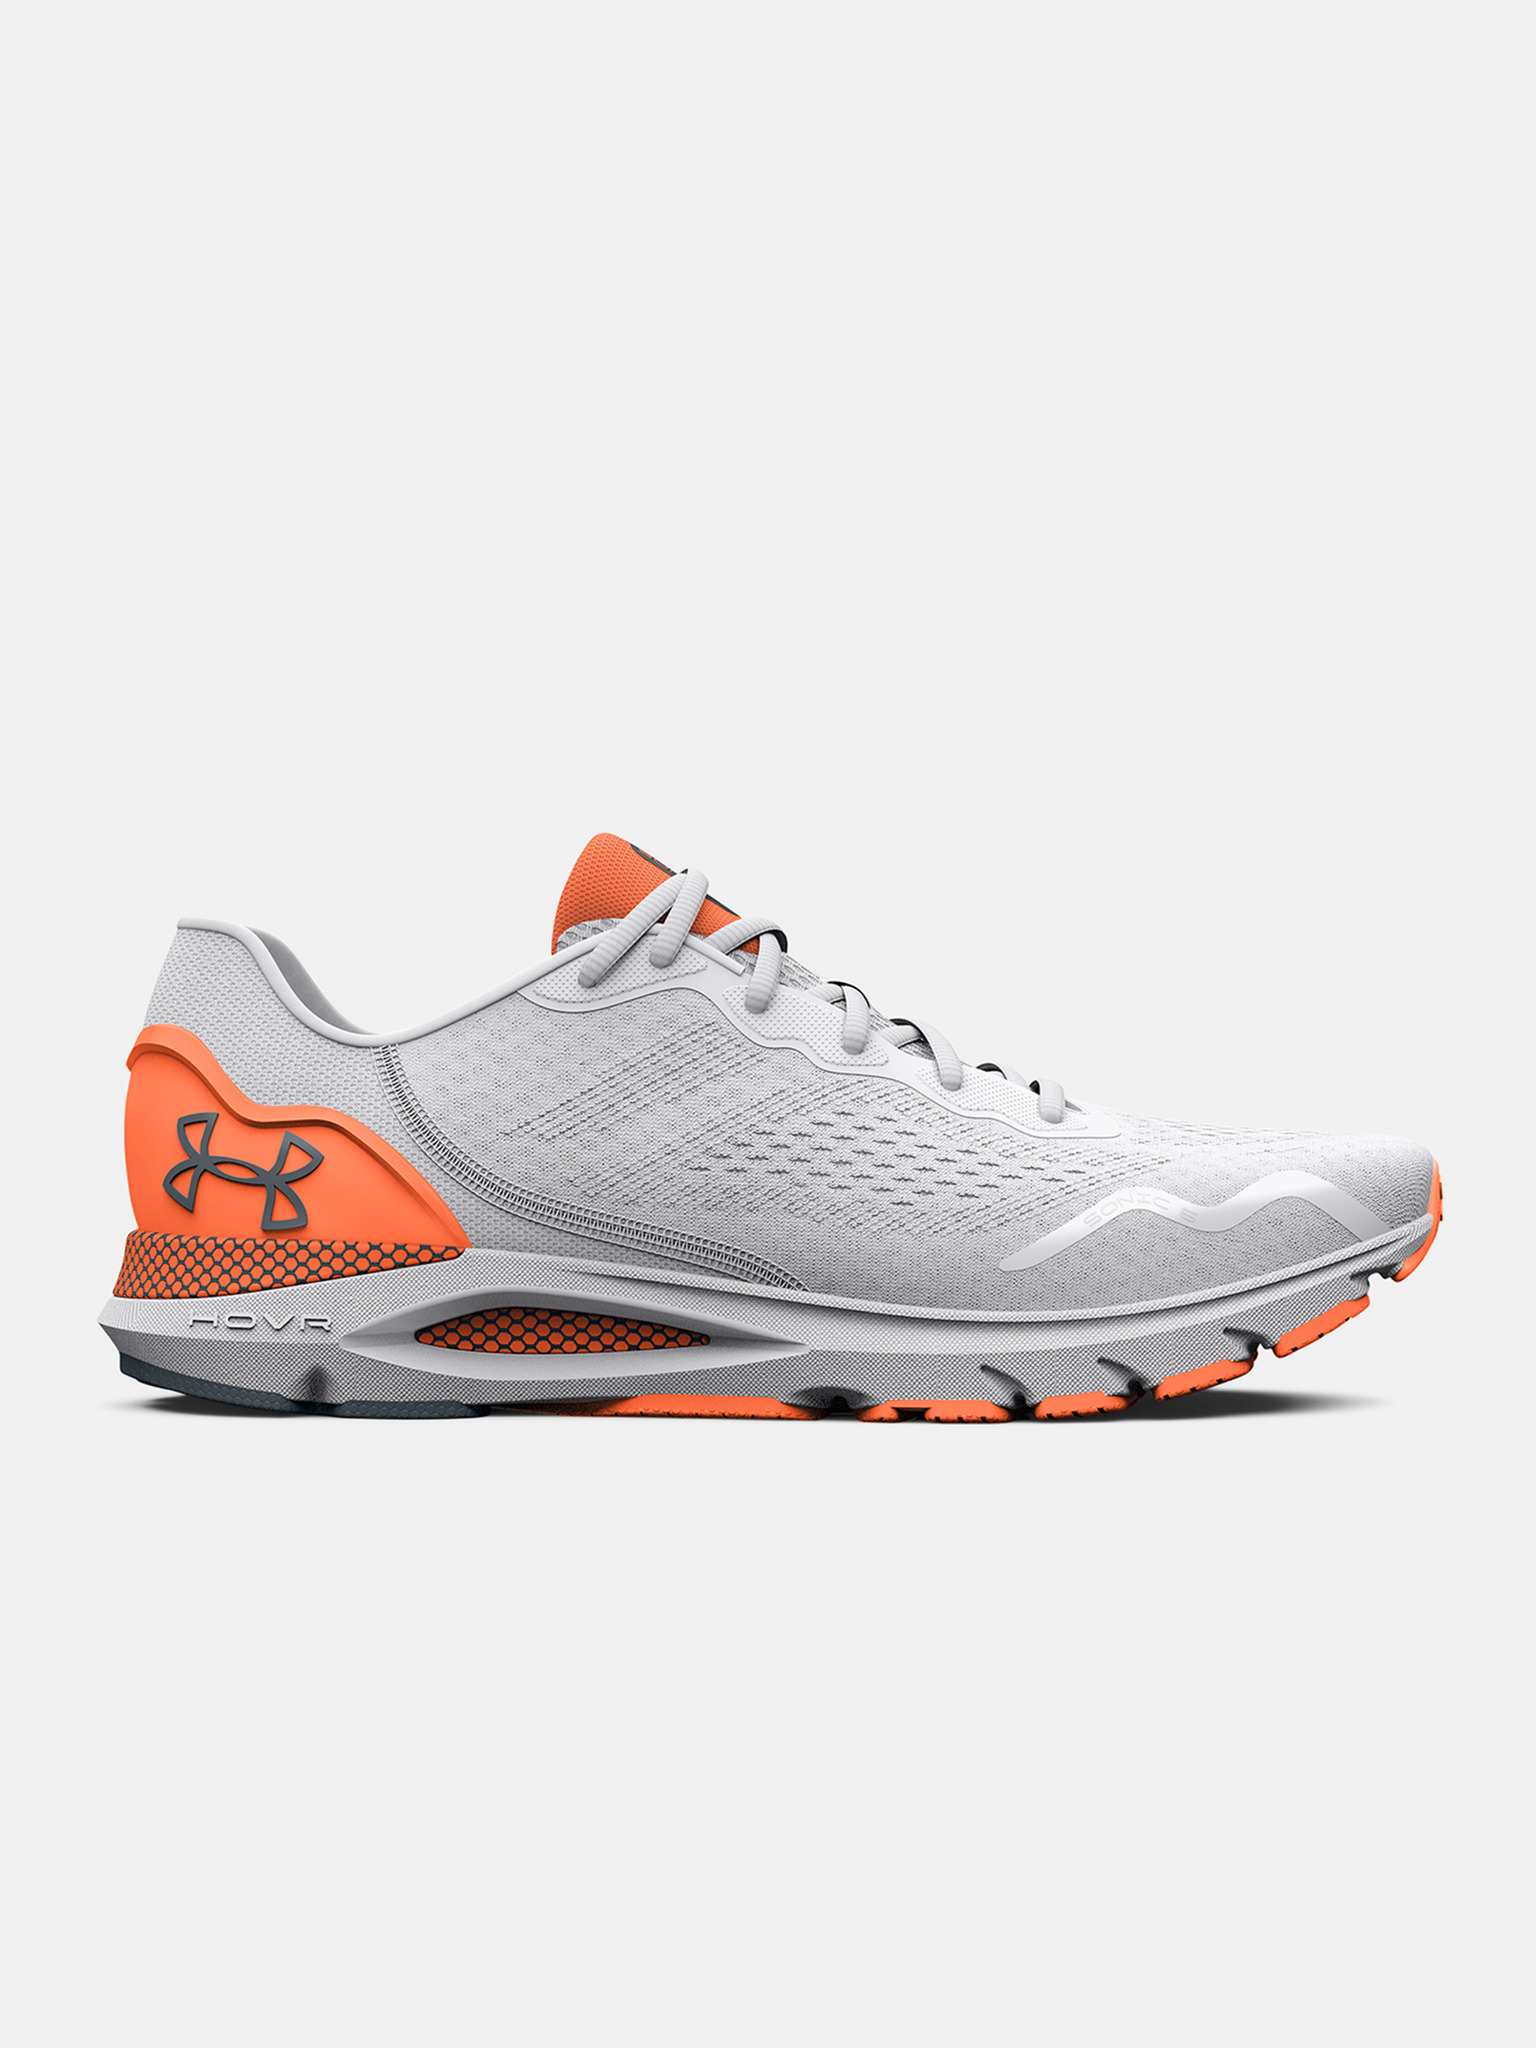 Under Armour - UA Project Rock 5 Sneakers